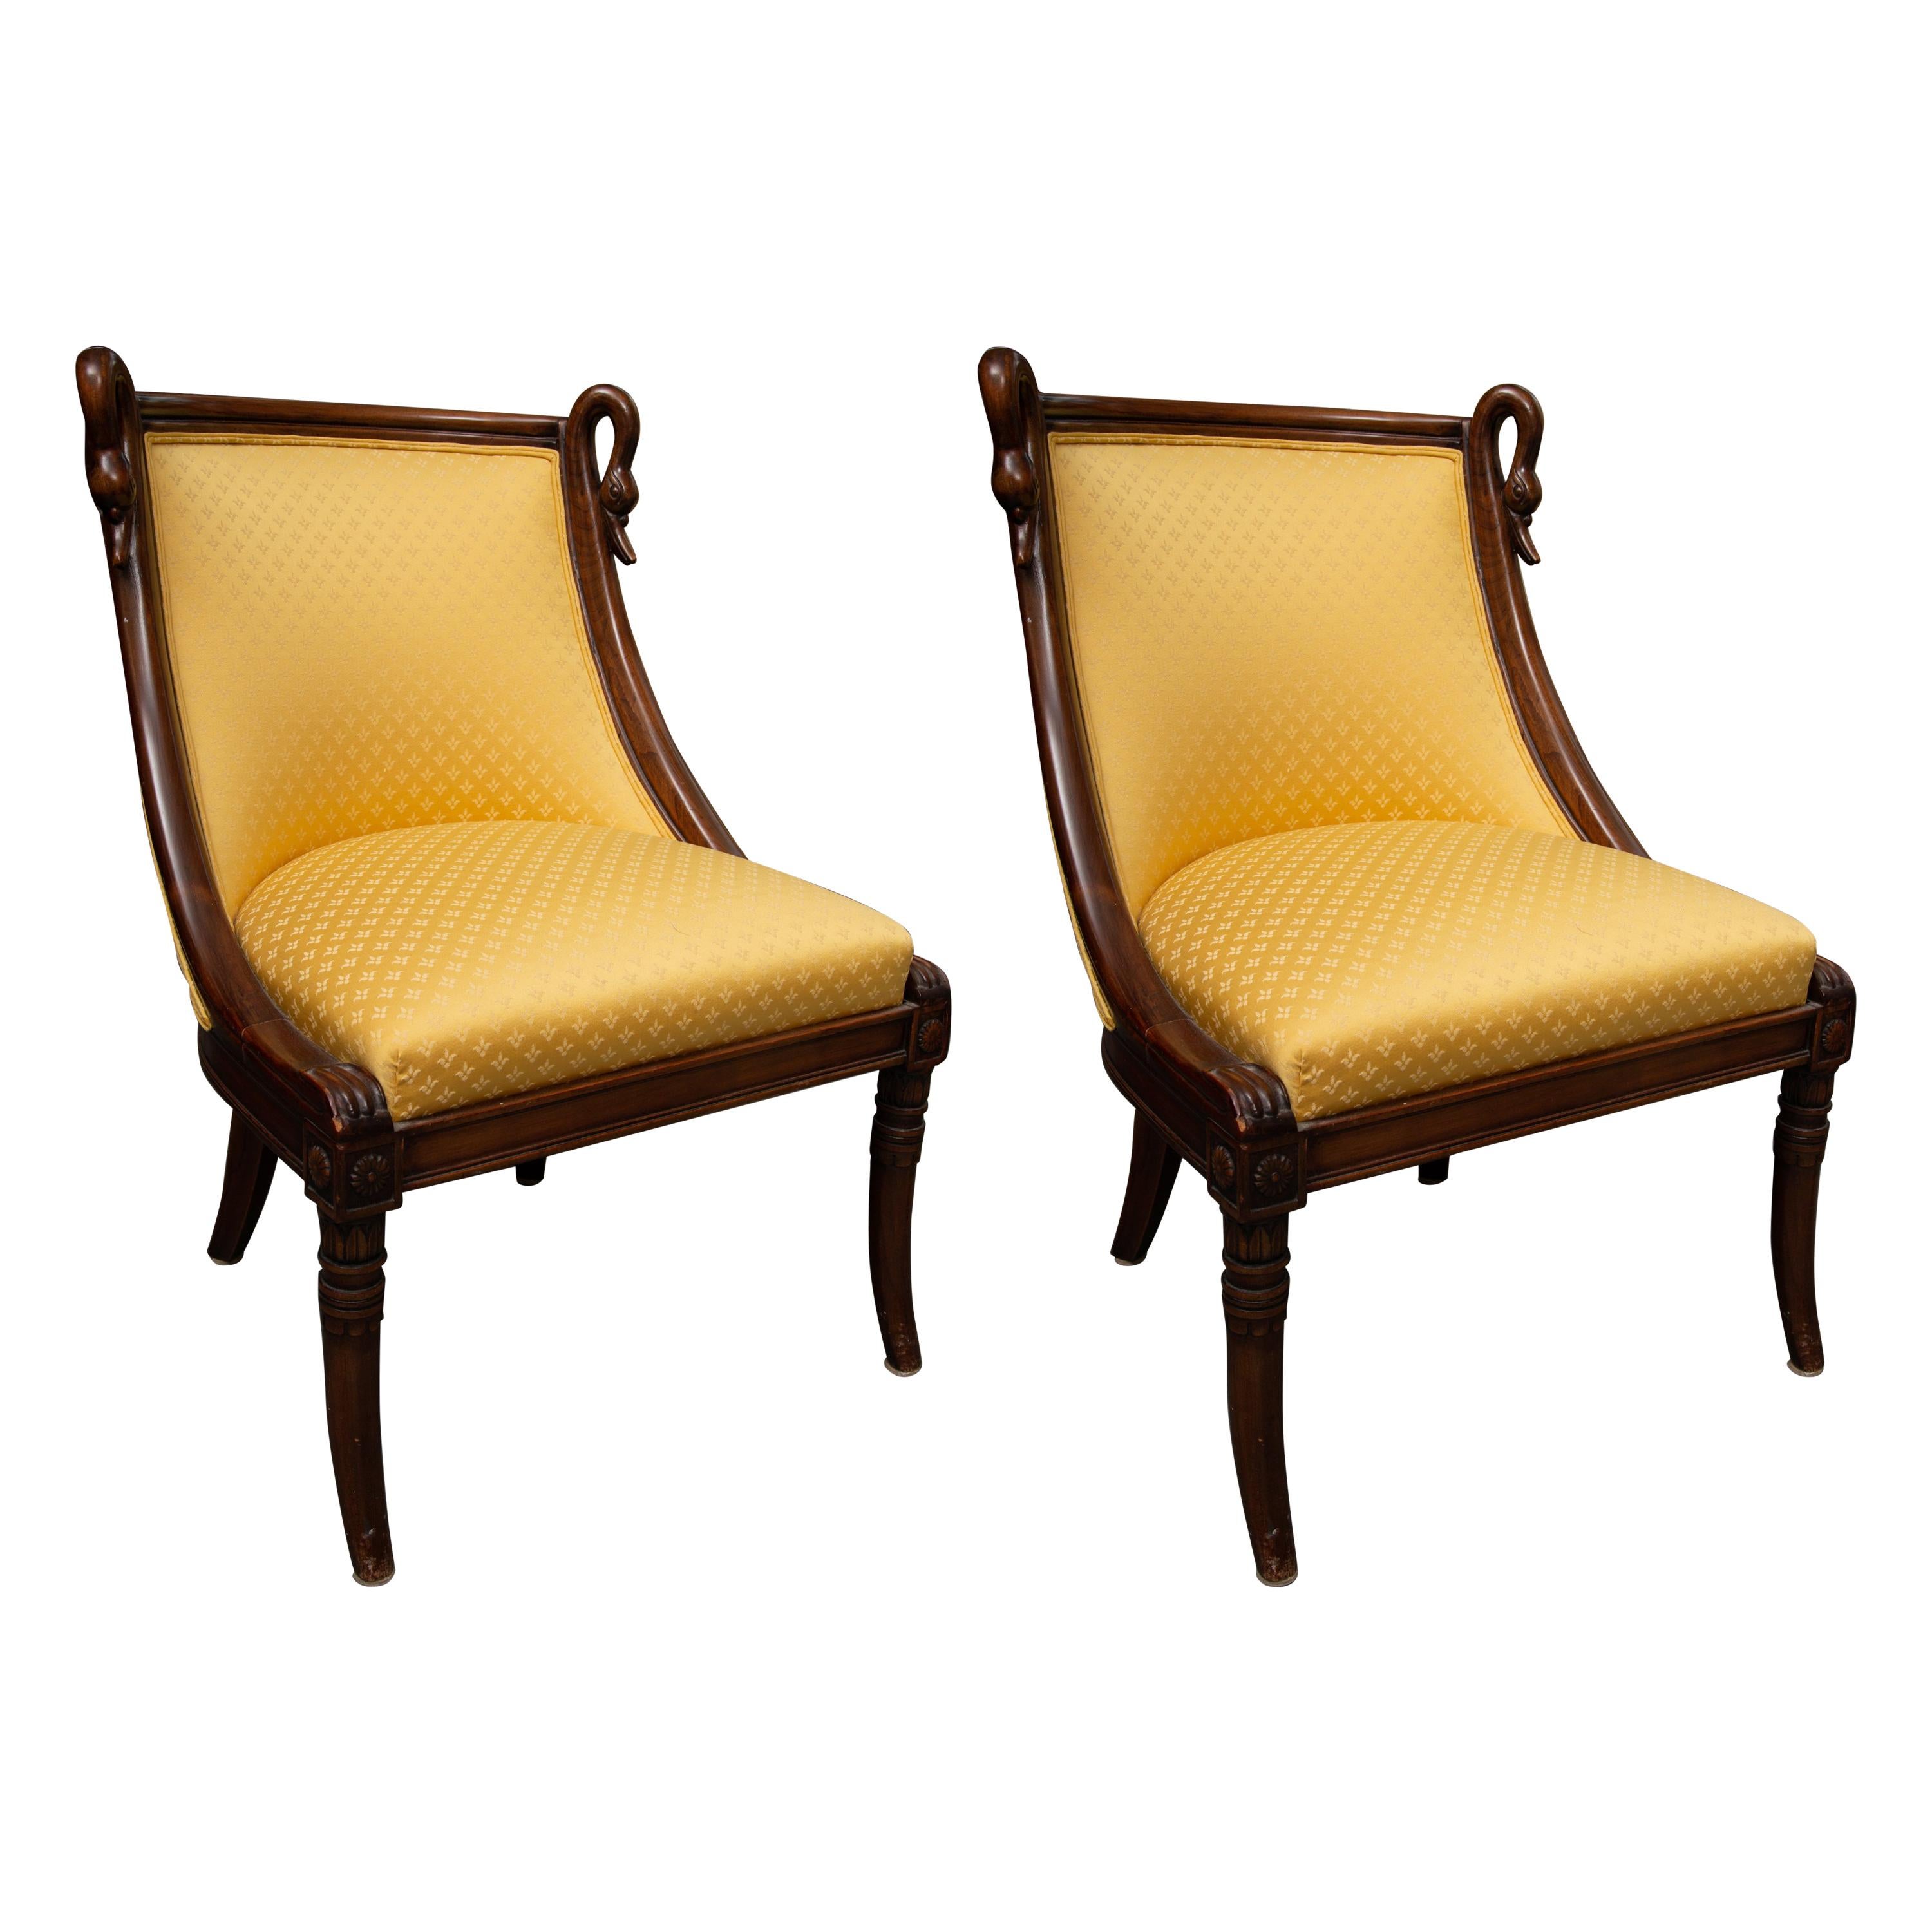 19th Century Pair of Children’s Directoire Style Upholstered Chairs